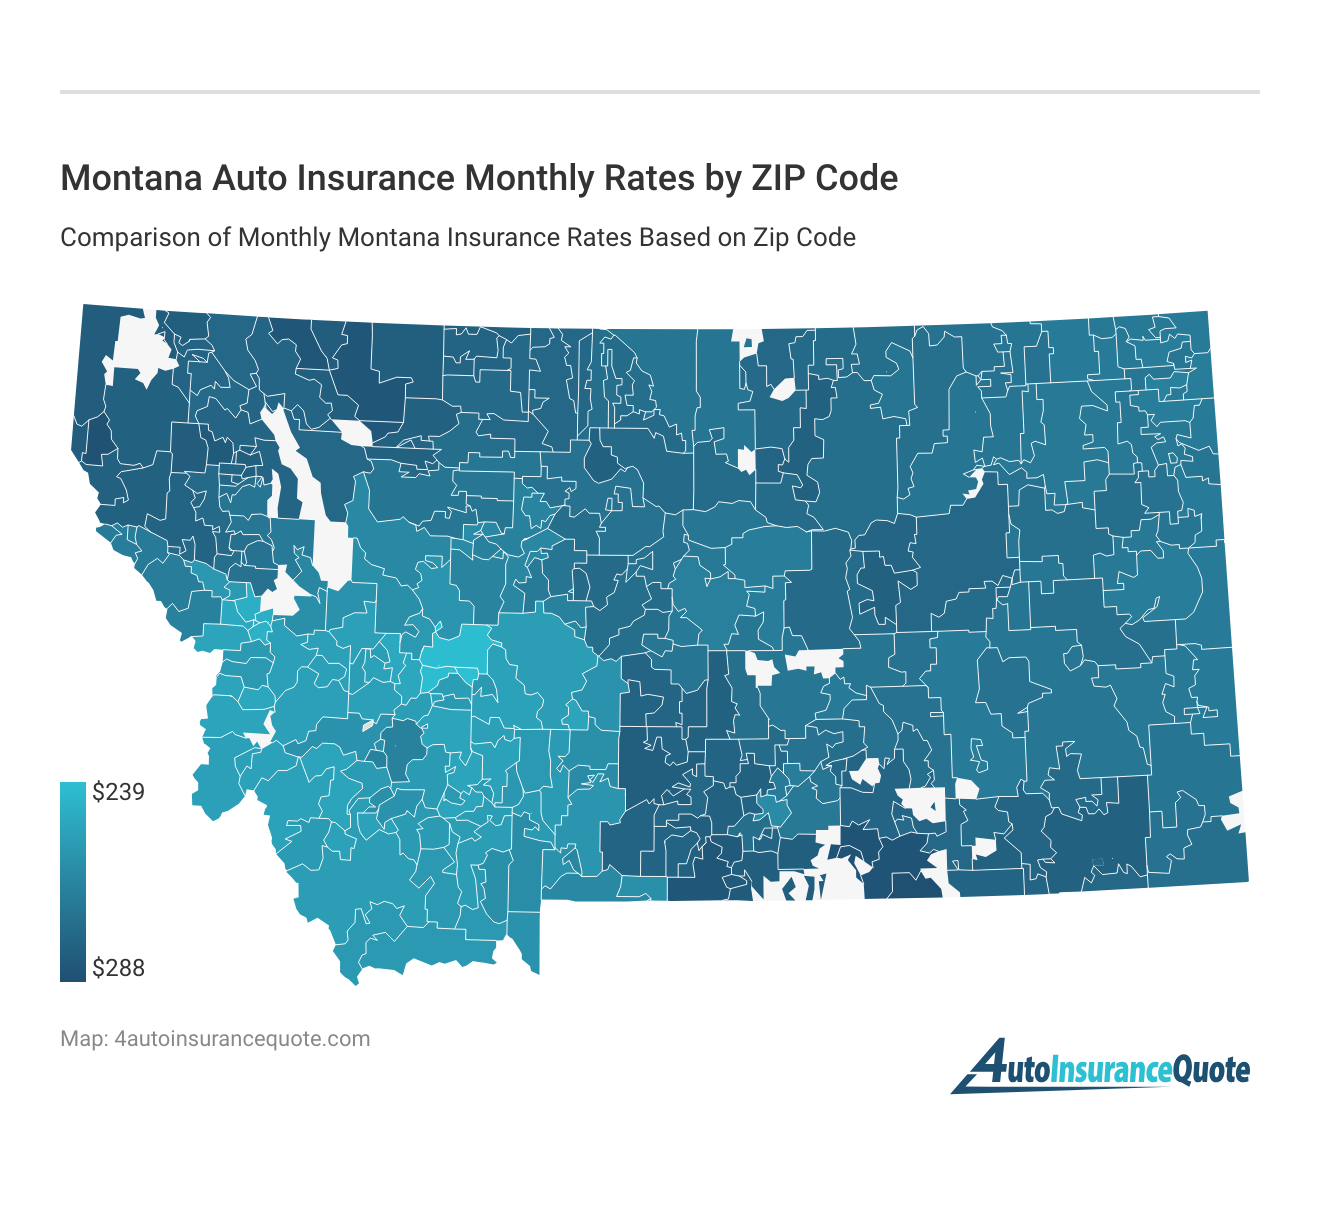 Montana Auto Insurance Monthly Rates by ZIP Code